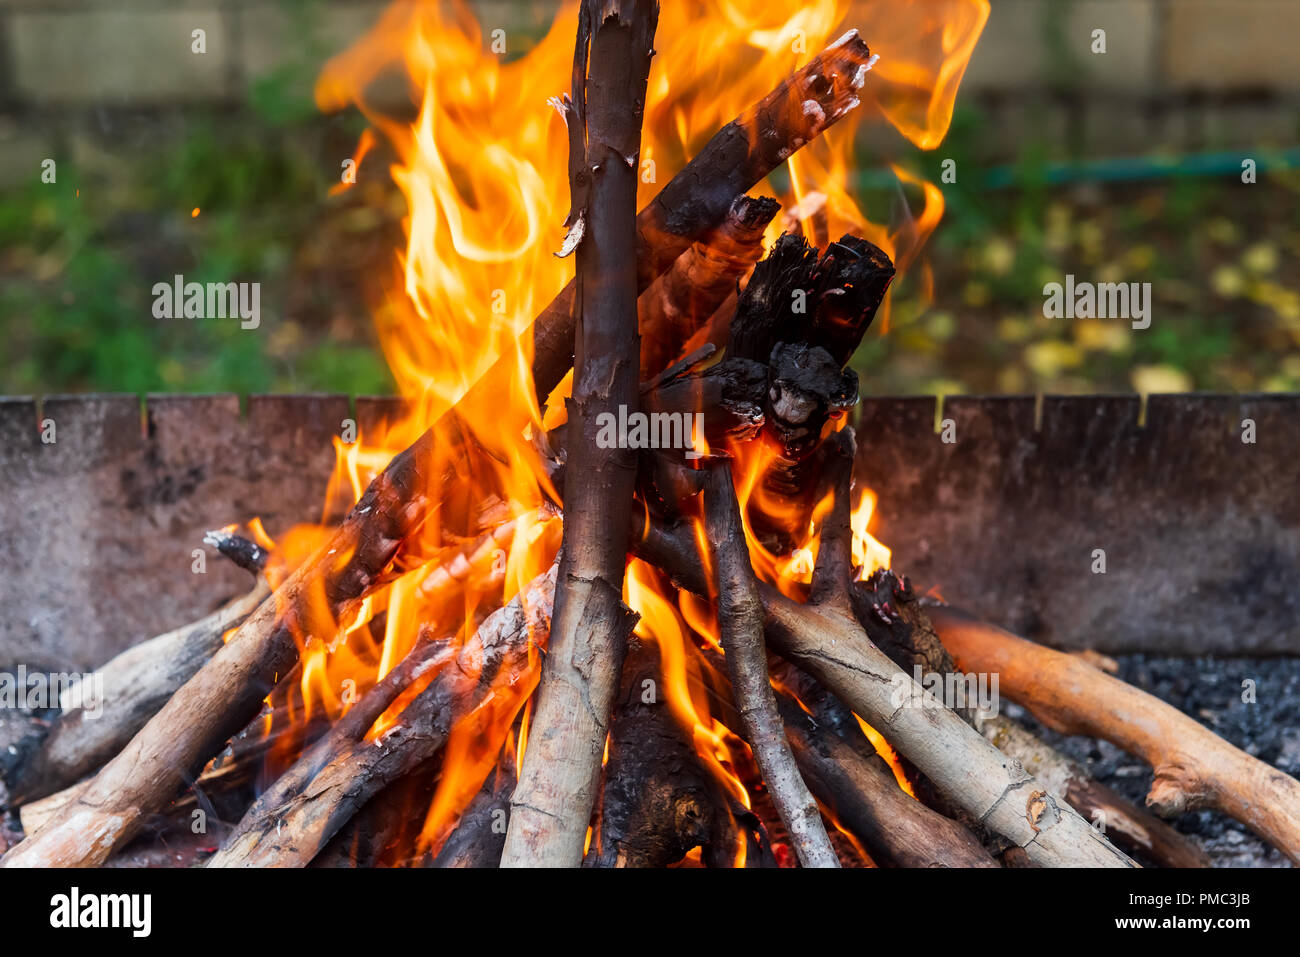 Firewood is burning in the brazier, picnic preparation Stock Photo - Alamy